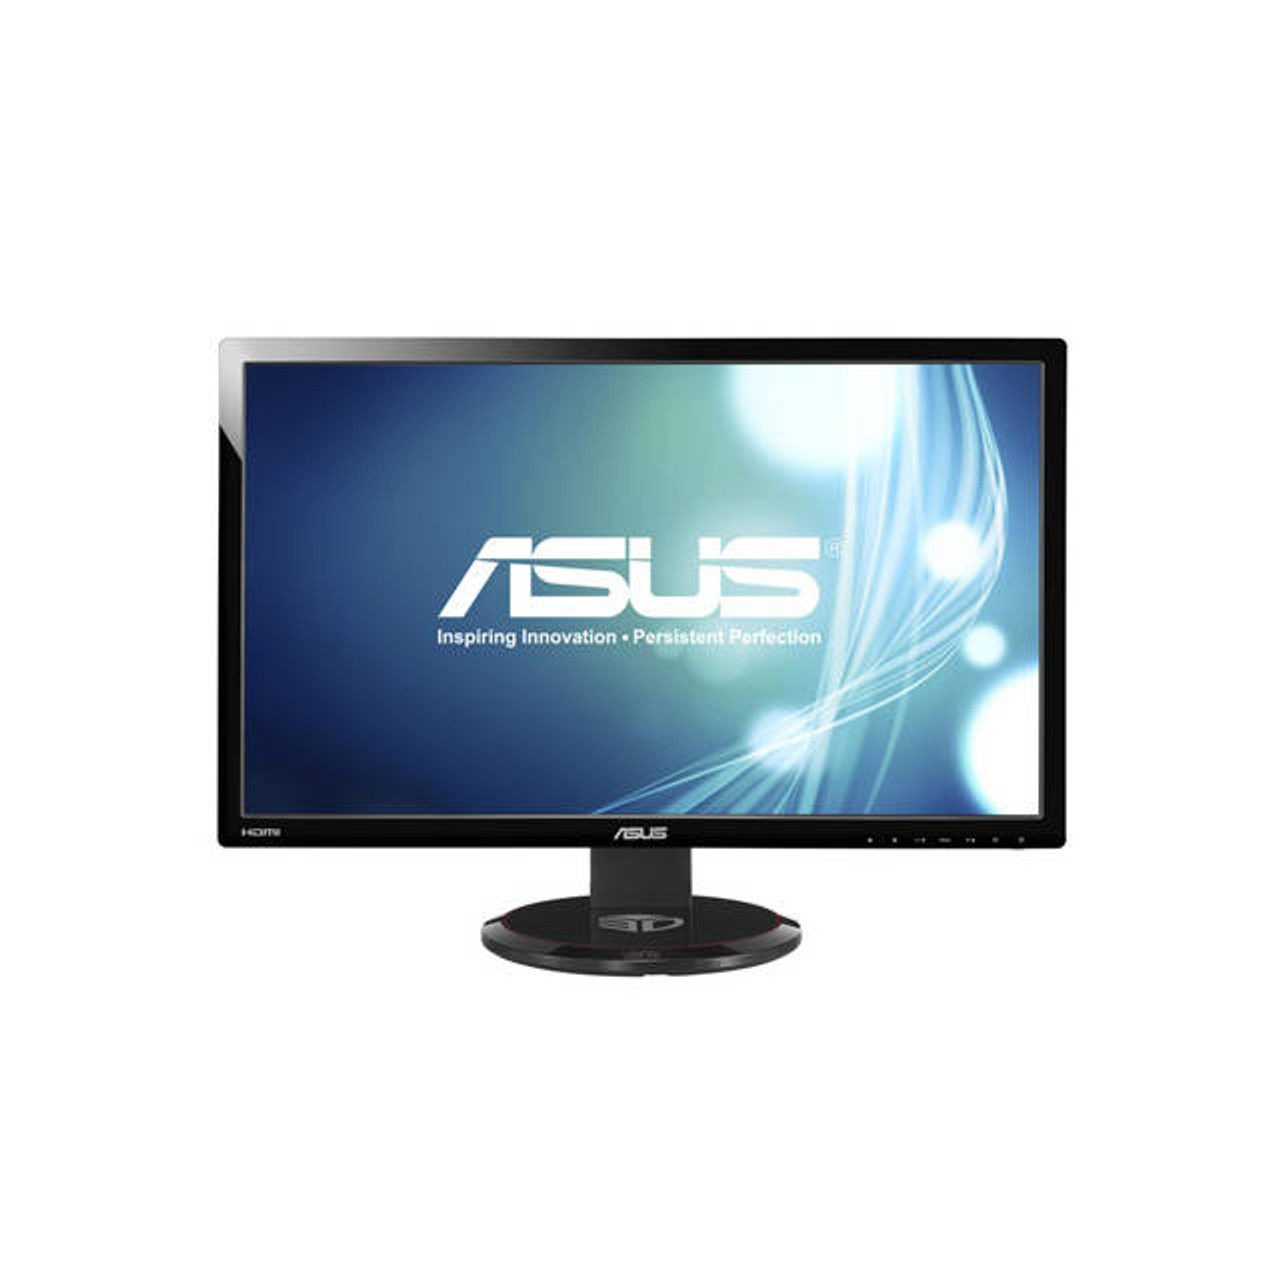 Asus VG278HE 27 inch Widescreen 50,000,000:1 2ms VGA/DVI/HDMI LCD Monitor, w/ Speakers (Black)